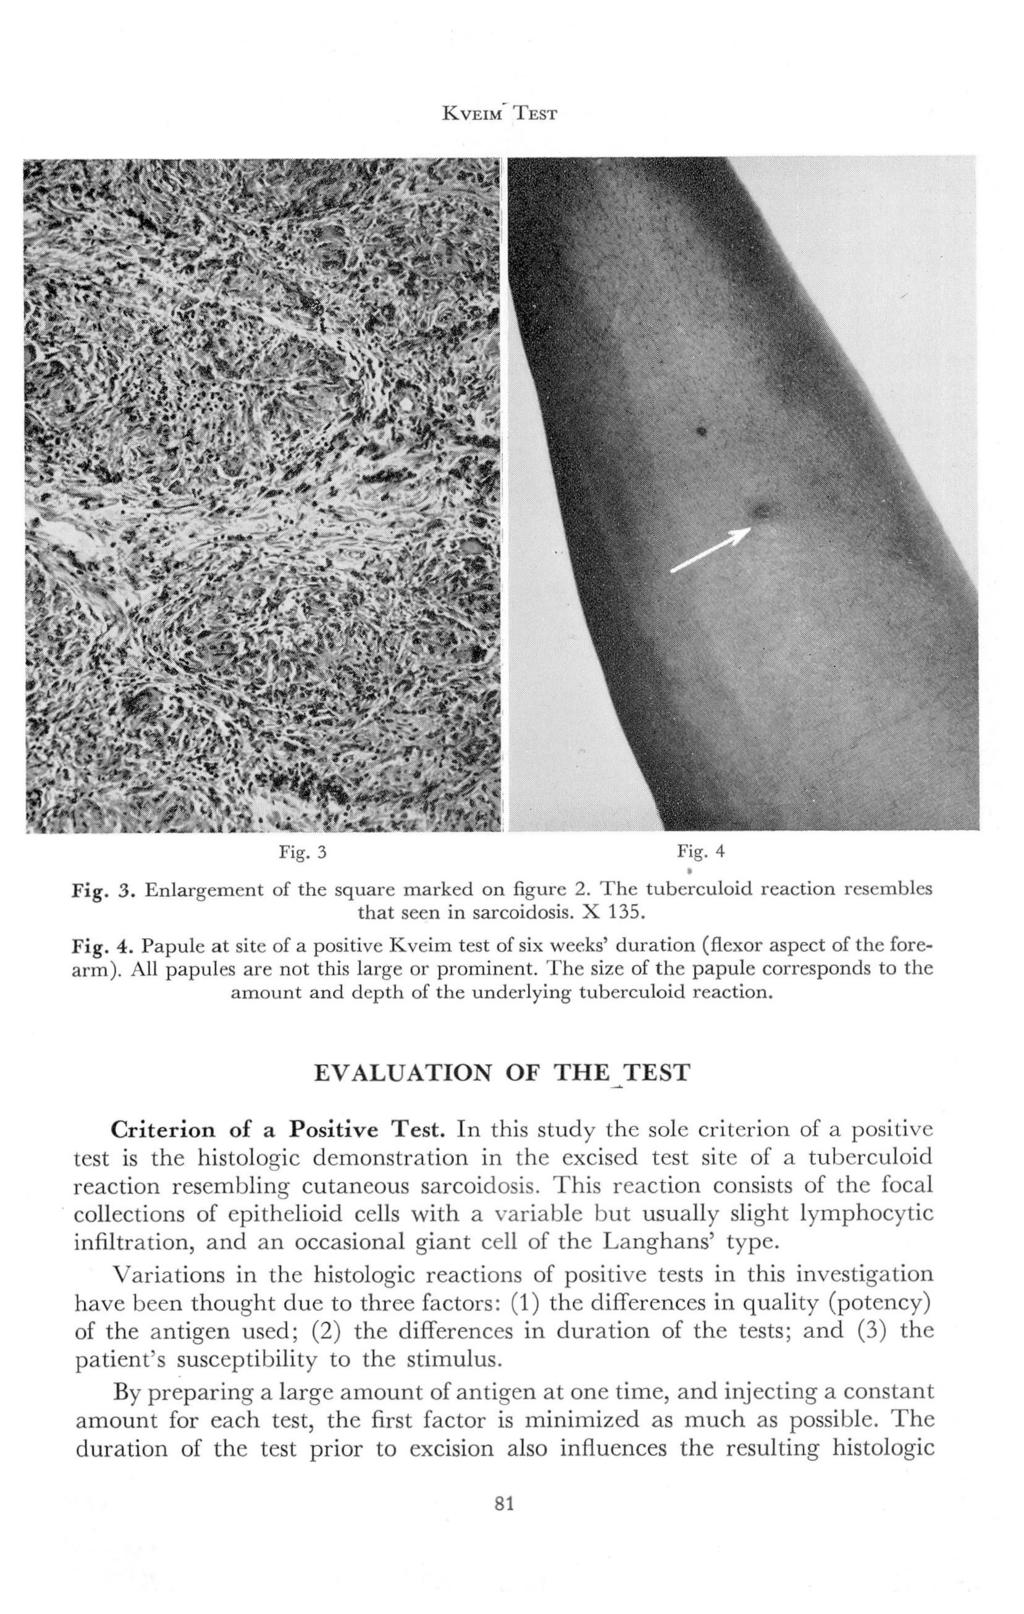 KVEIM TEST Fig. 3 Fig. 4 Fig. 3. Enlargement of the square marked on figure 2. The tuberculoid reaction resembles that seen in sarcoidosis. X 135. Fig. 4. Papule at site of a positive Kveim test of six weeks' duration (flexor aspect of the forearm).